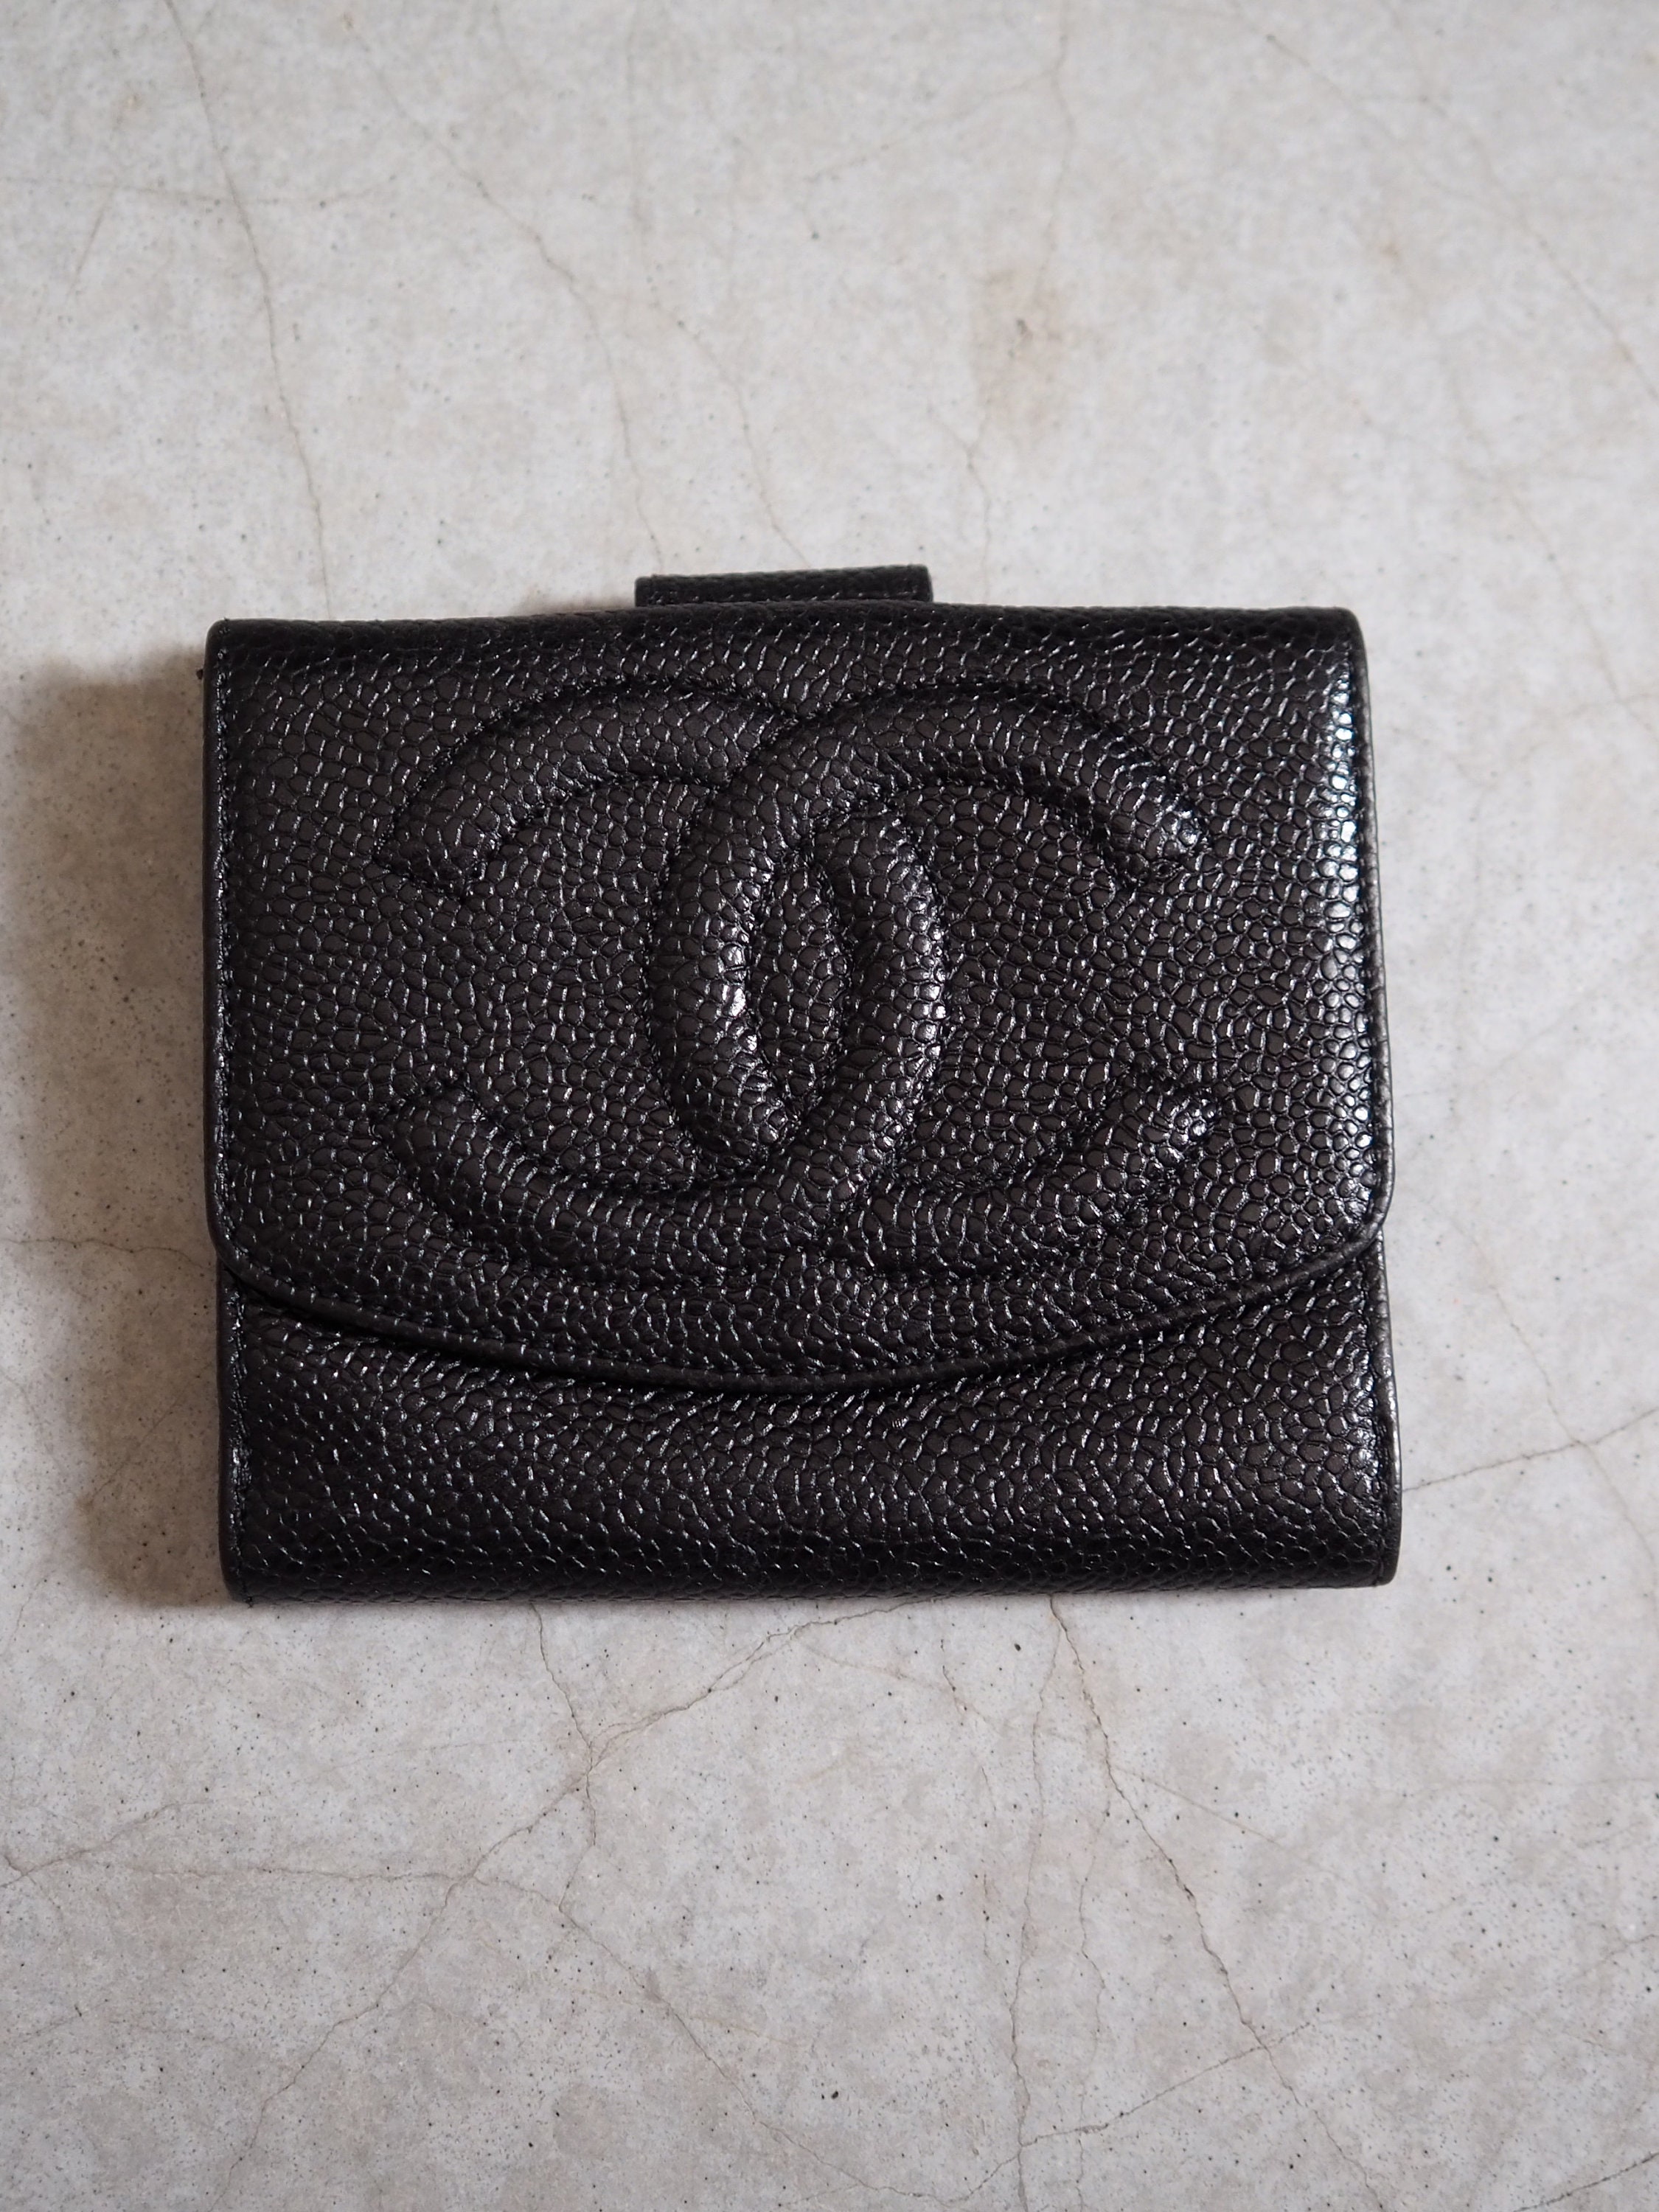 Chanel Caviar Quilted Key Holder Case Black